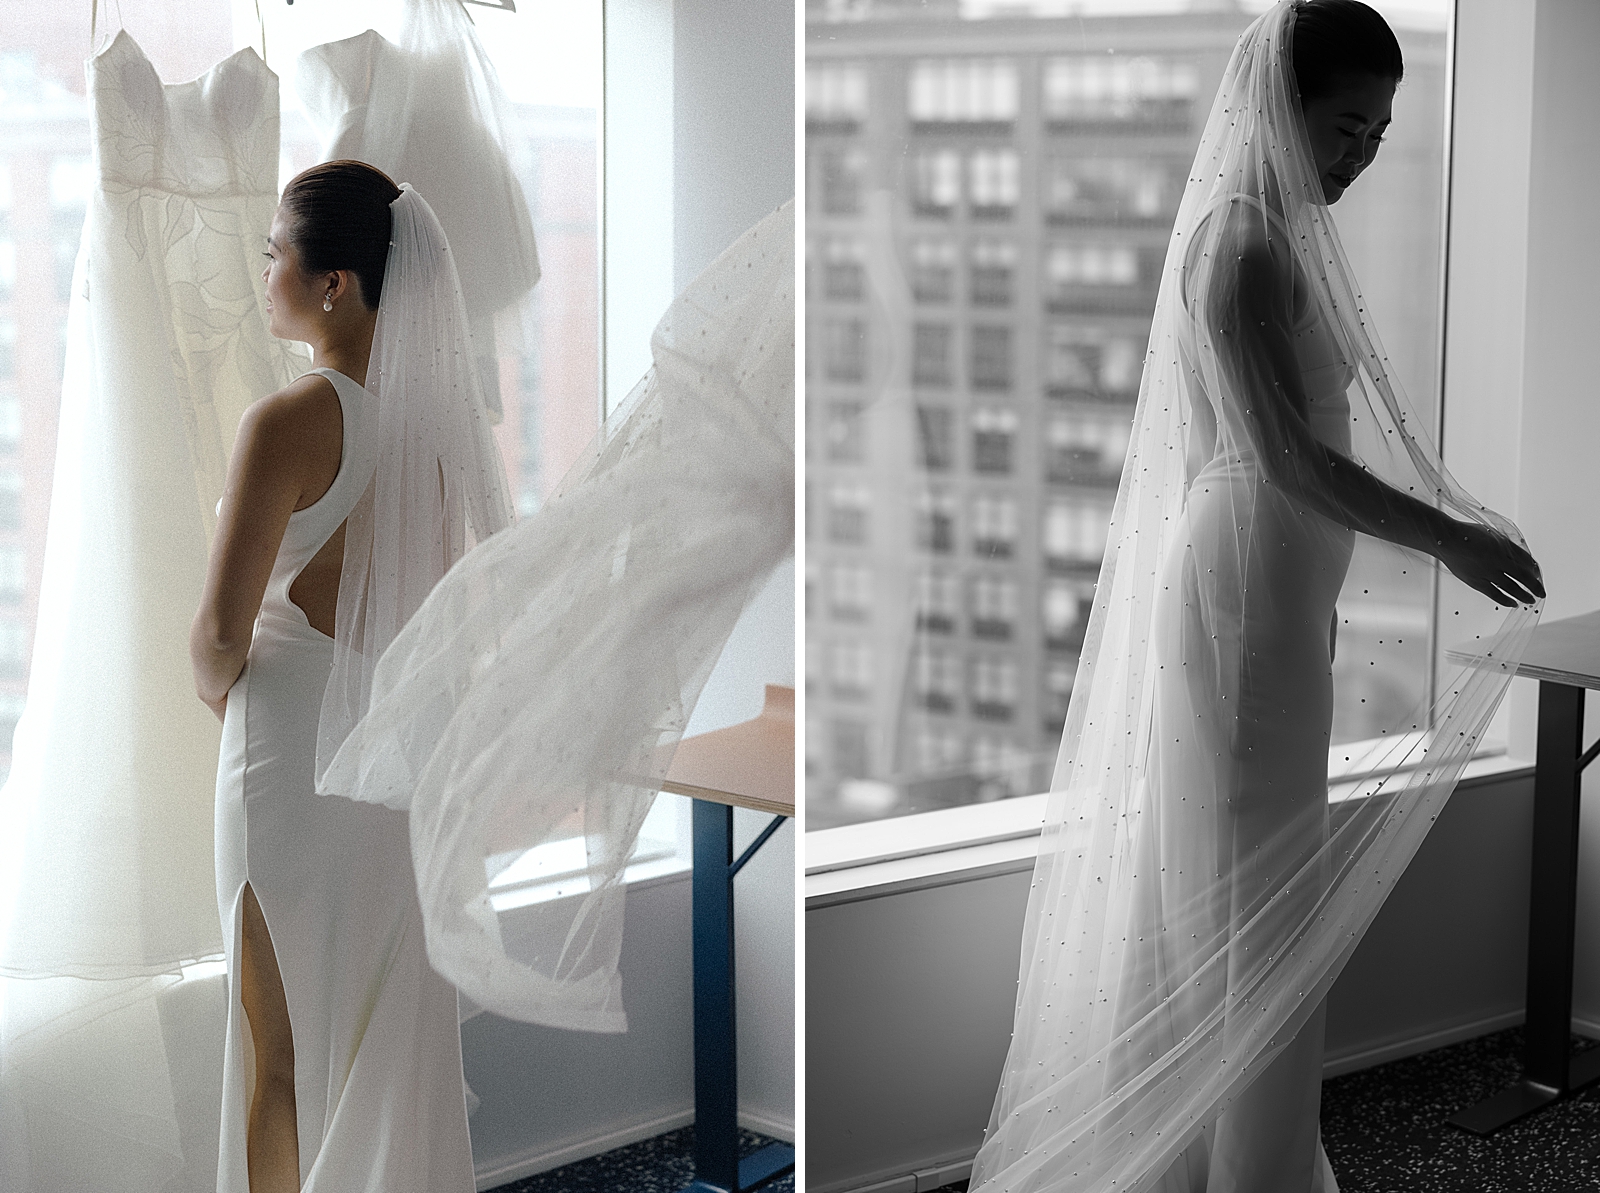 Left photo: Photo of the bride in her first dress, shot from behind. 
Right photo: Black and white shot of the bride in her first dress of the evening. 